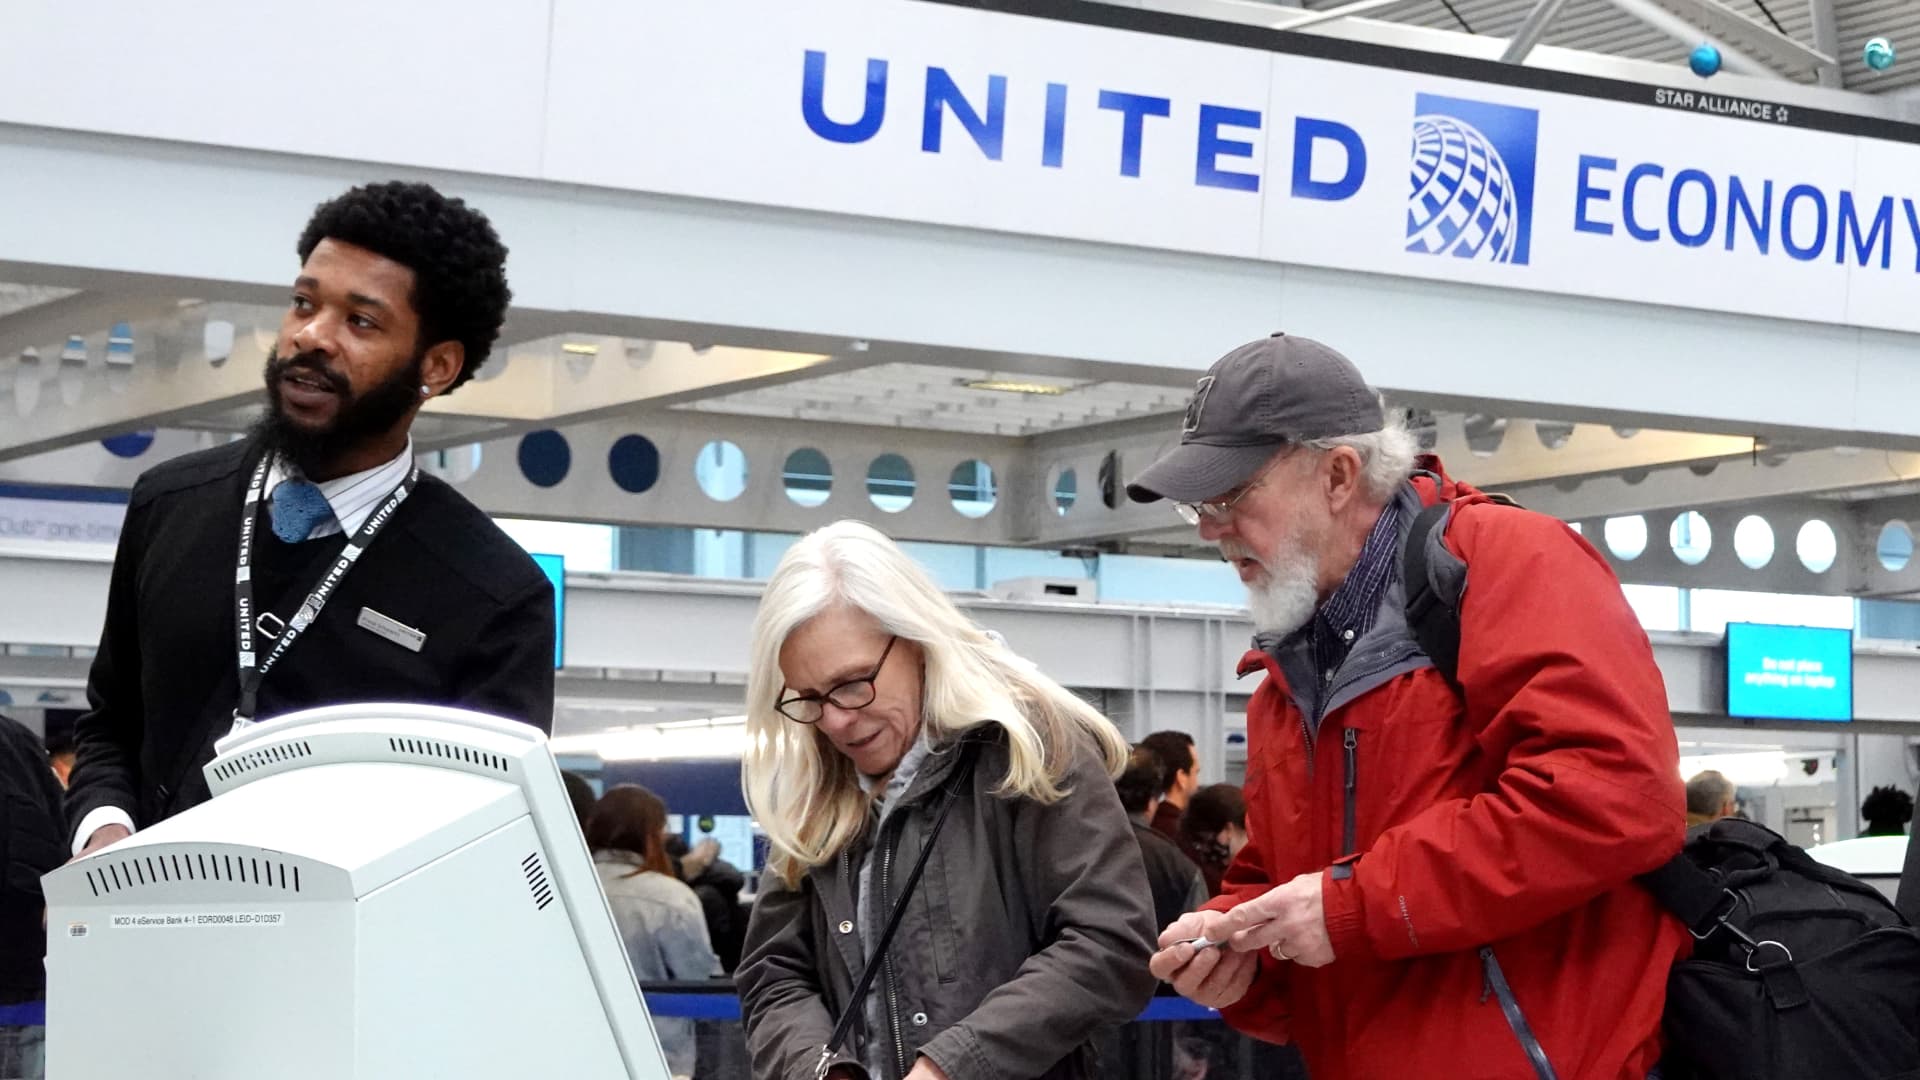 United Airlines starts letting customers pool frequent flyer miles